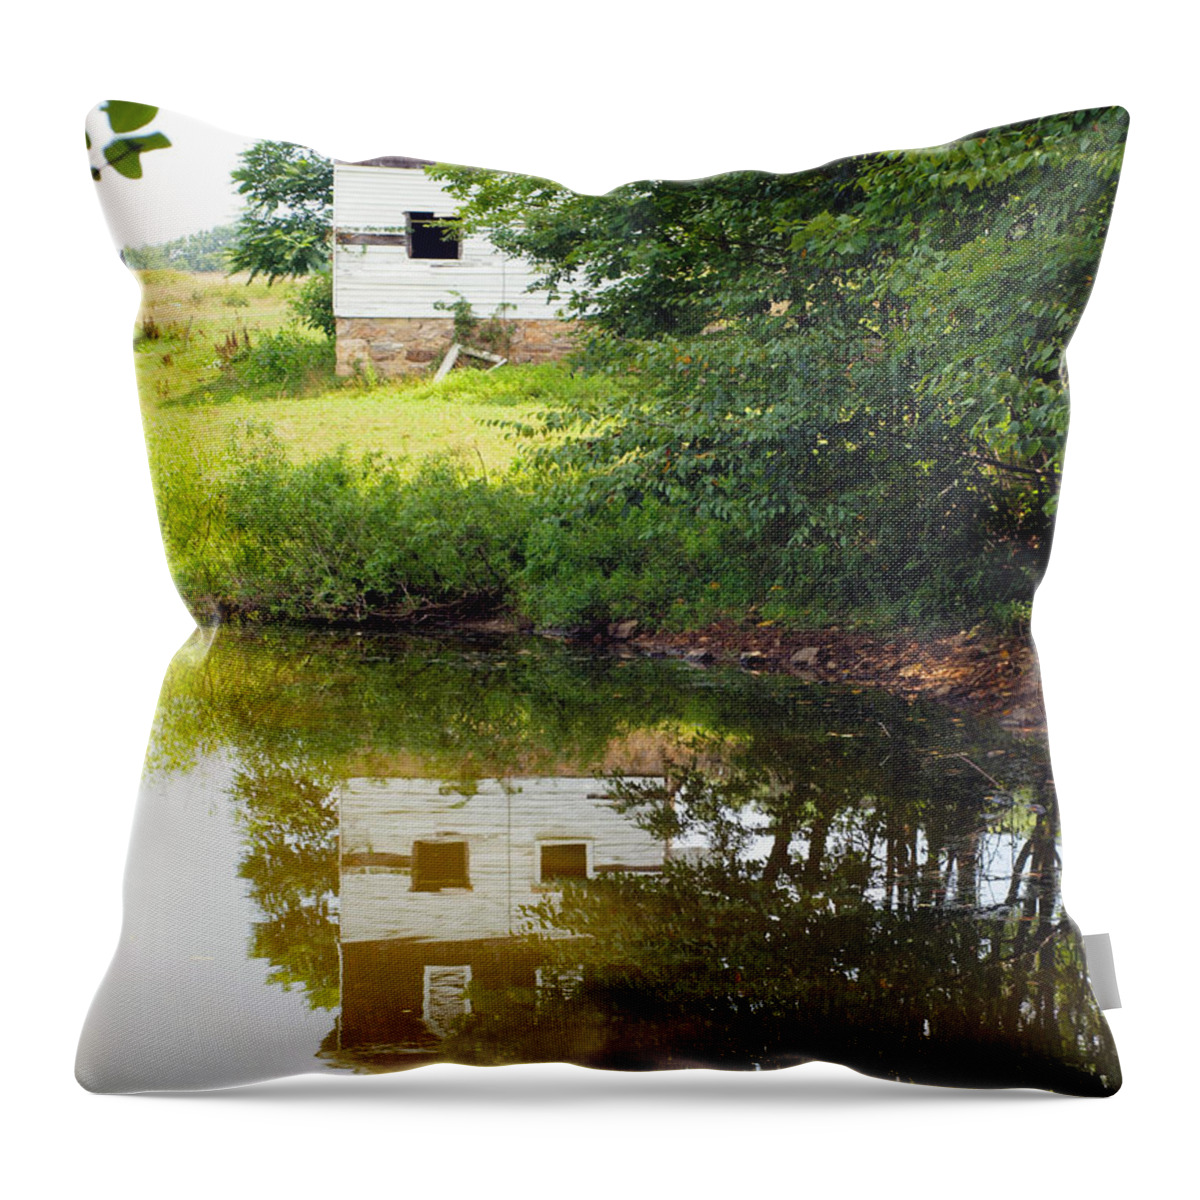 Farm Animals Throw Pillow featuring the photograph Water Reflections by Robert Margetts